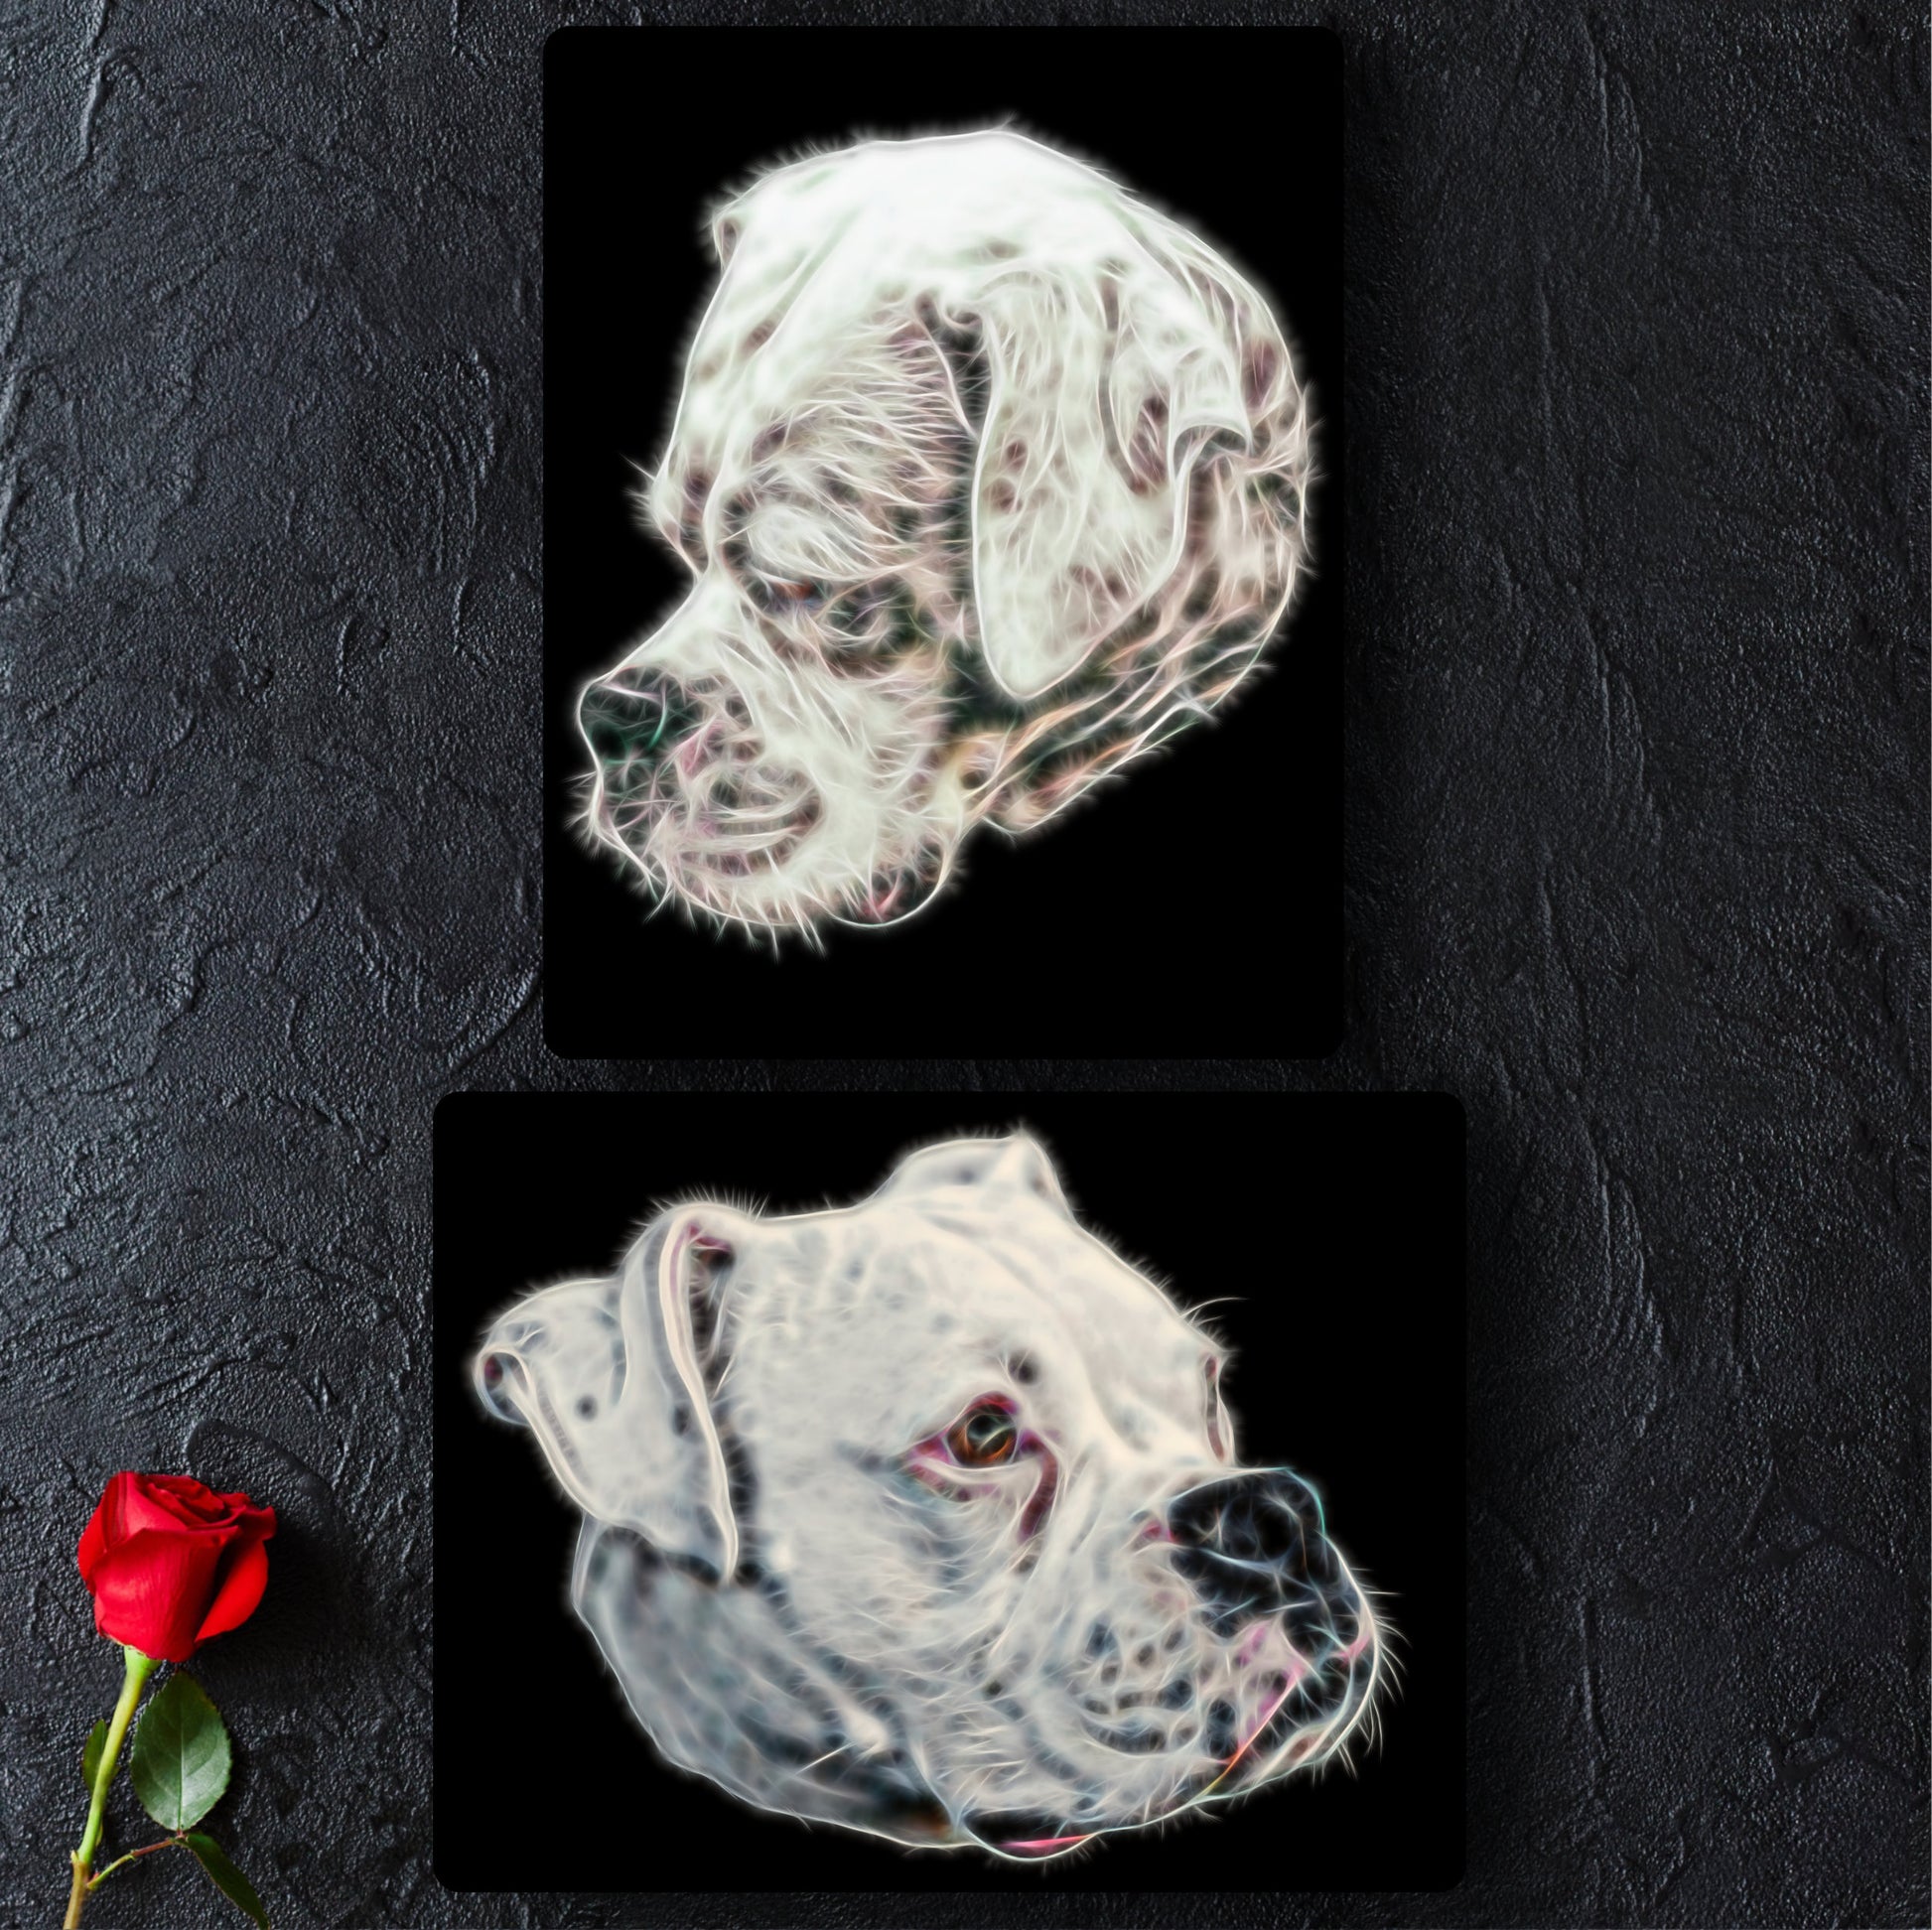 White Boxer Dog Metal Wall Plaque with Stunning Fractal Art Design